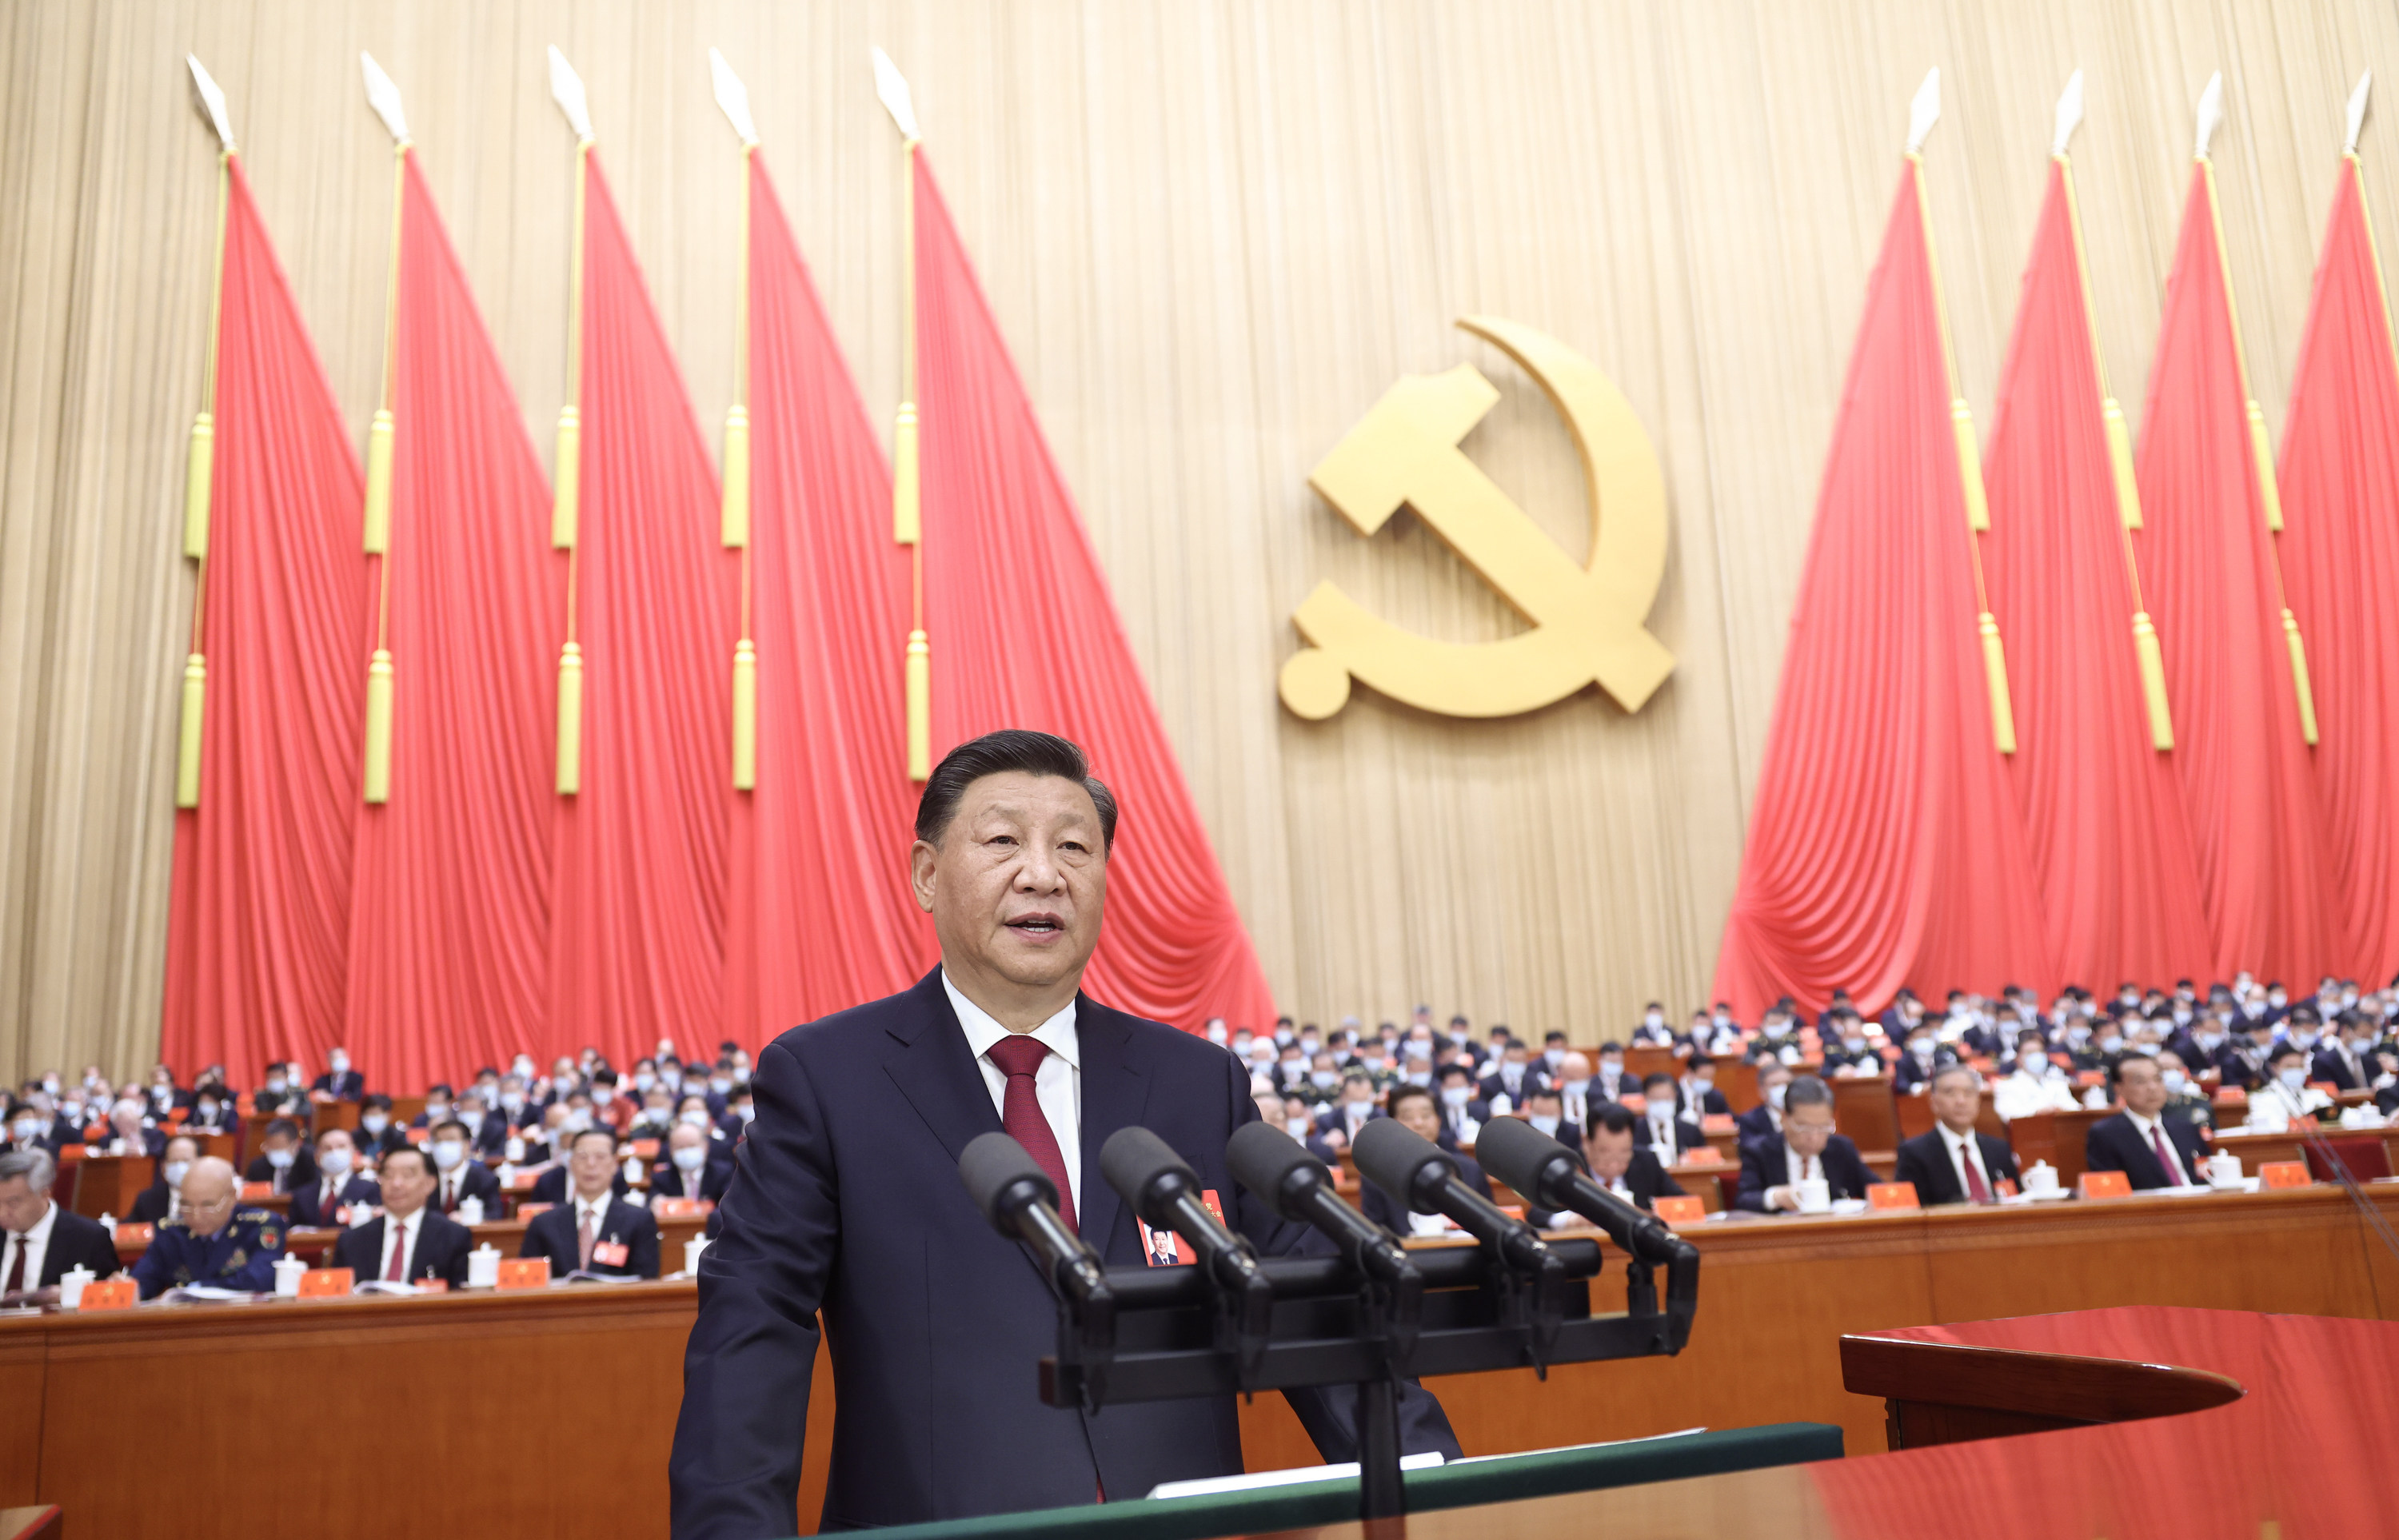 Chinese President Xi Jinping addresses the opening session of the 20th Communist Party congress, at the Great Hall of the People in Beijing on October 16. Photo: Xinhua